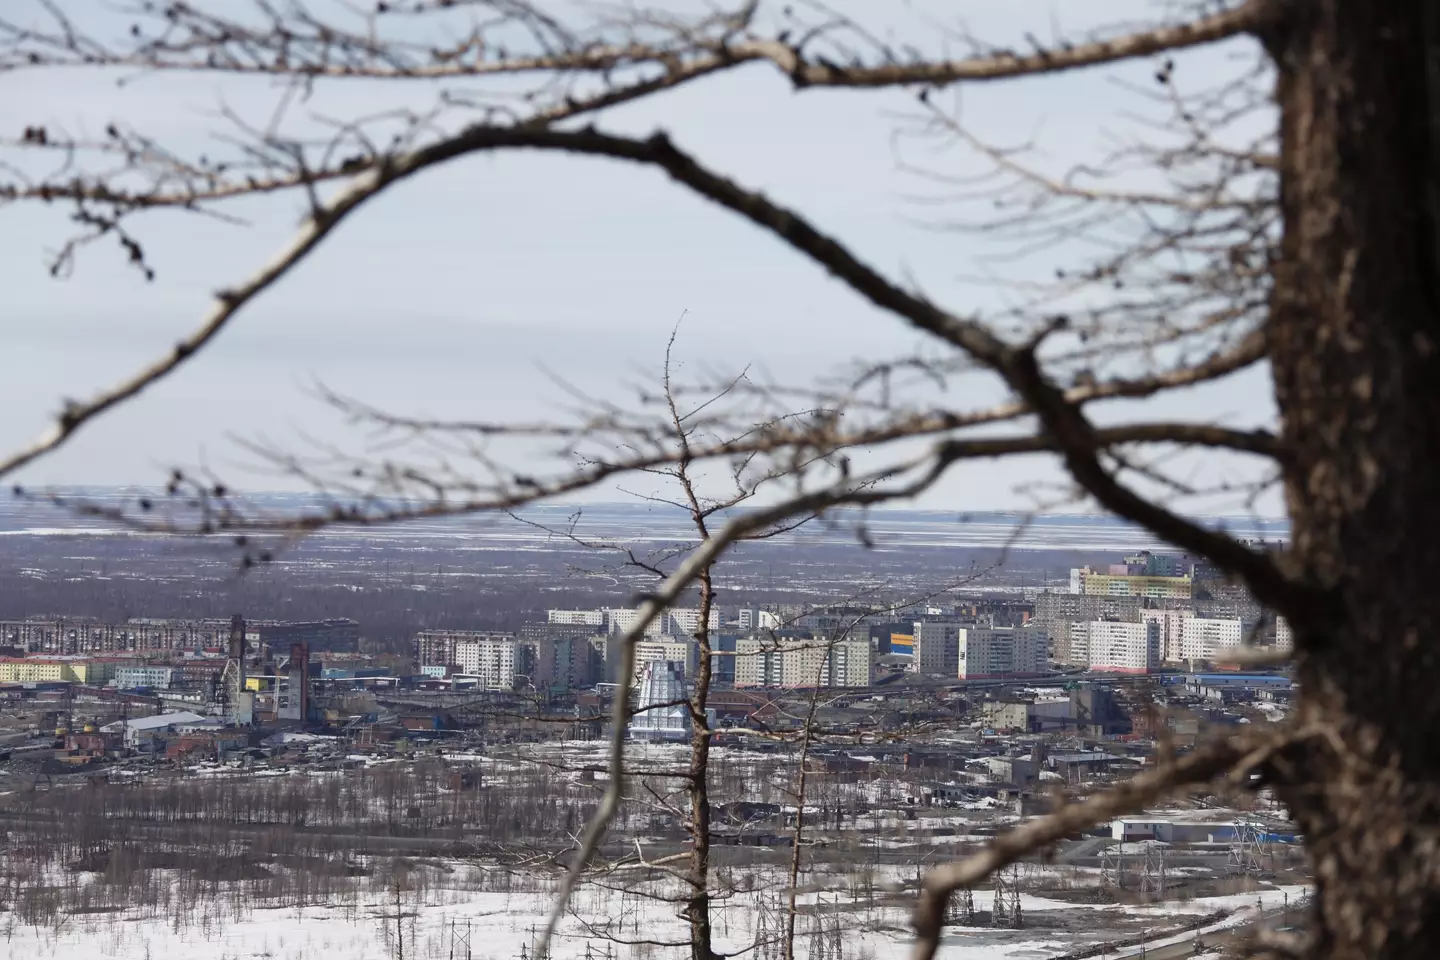 An isolated city in Russia has been branded ‘the most depressing on earth’.